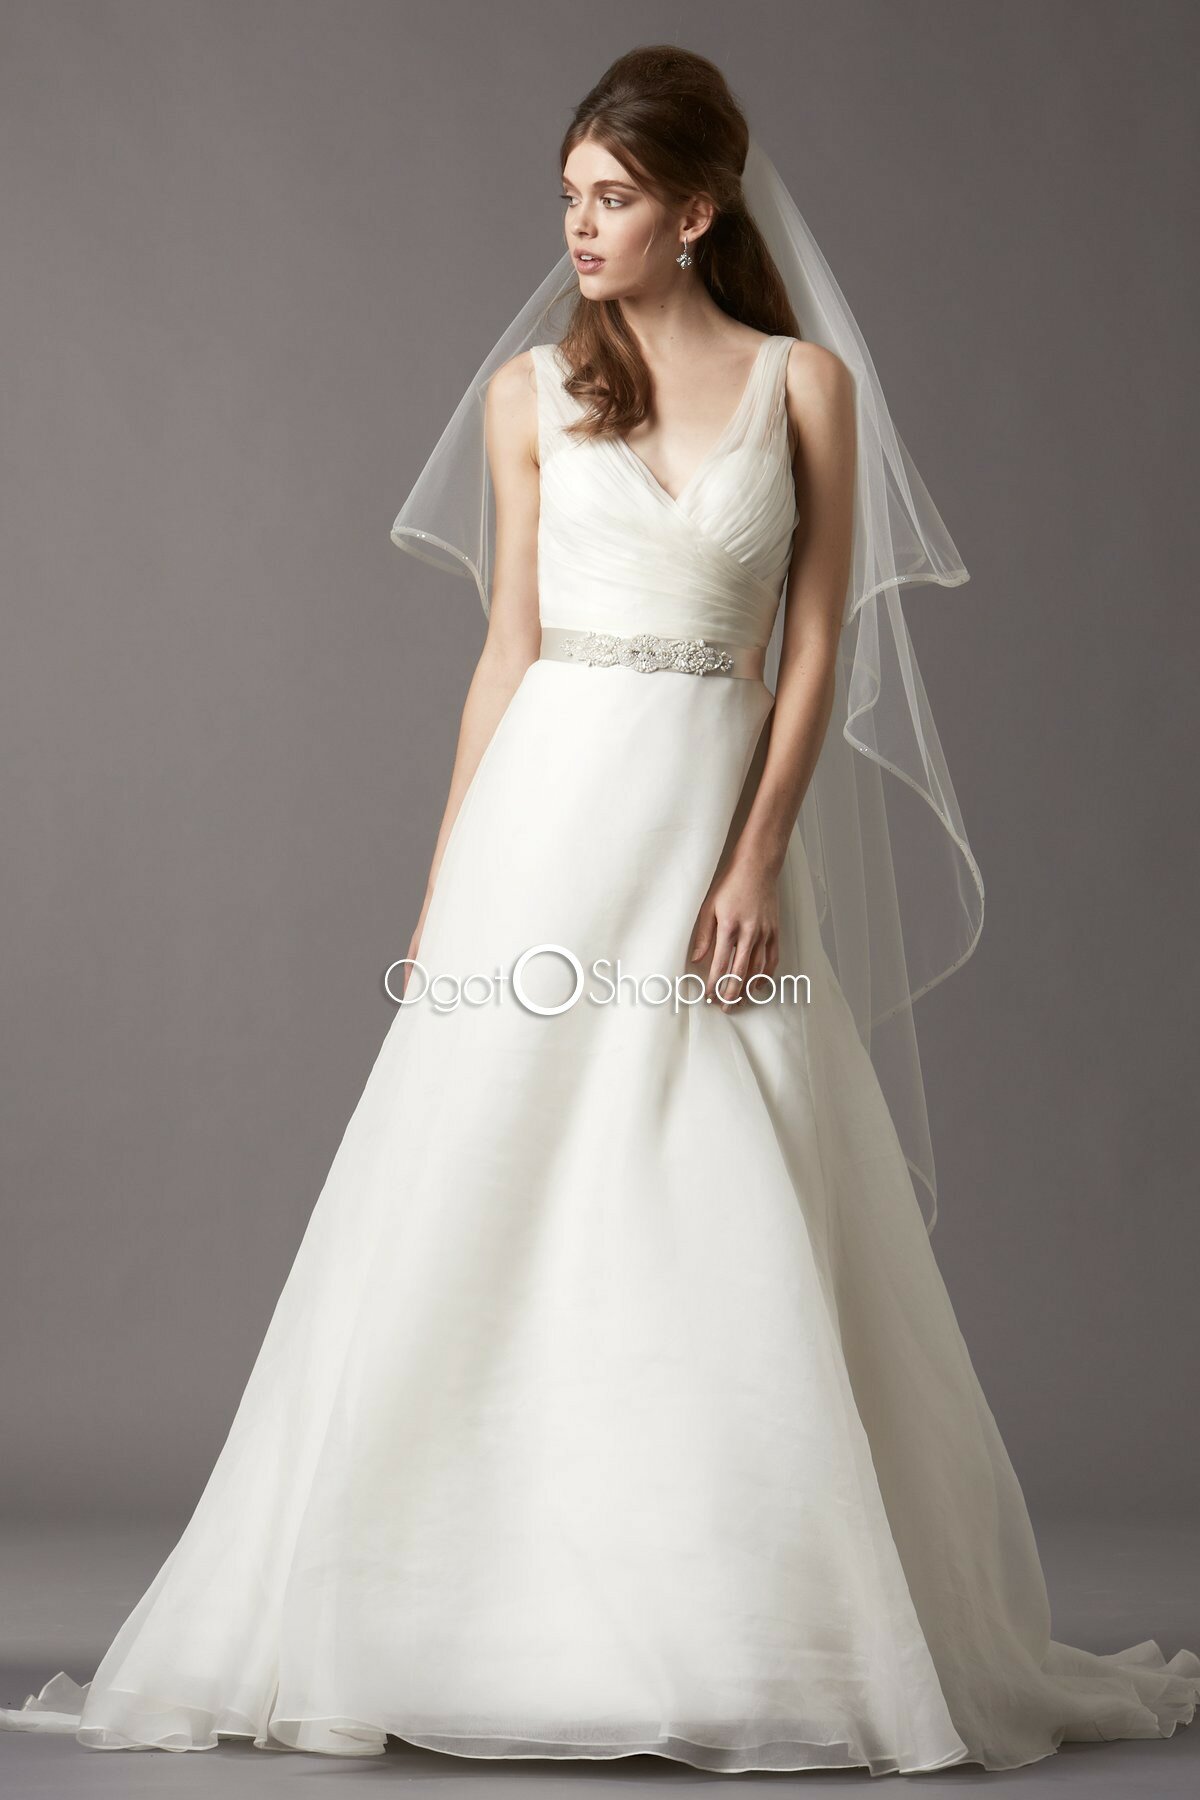 A line wedding dresses with straps Photo - 10